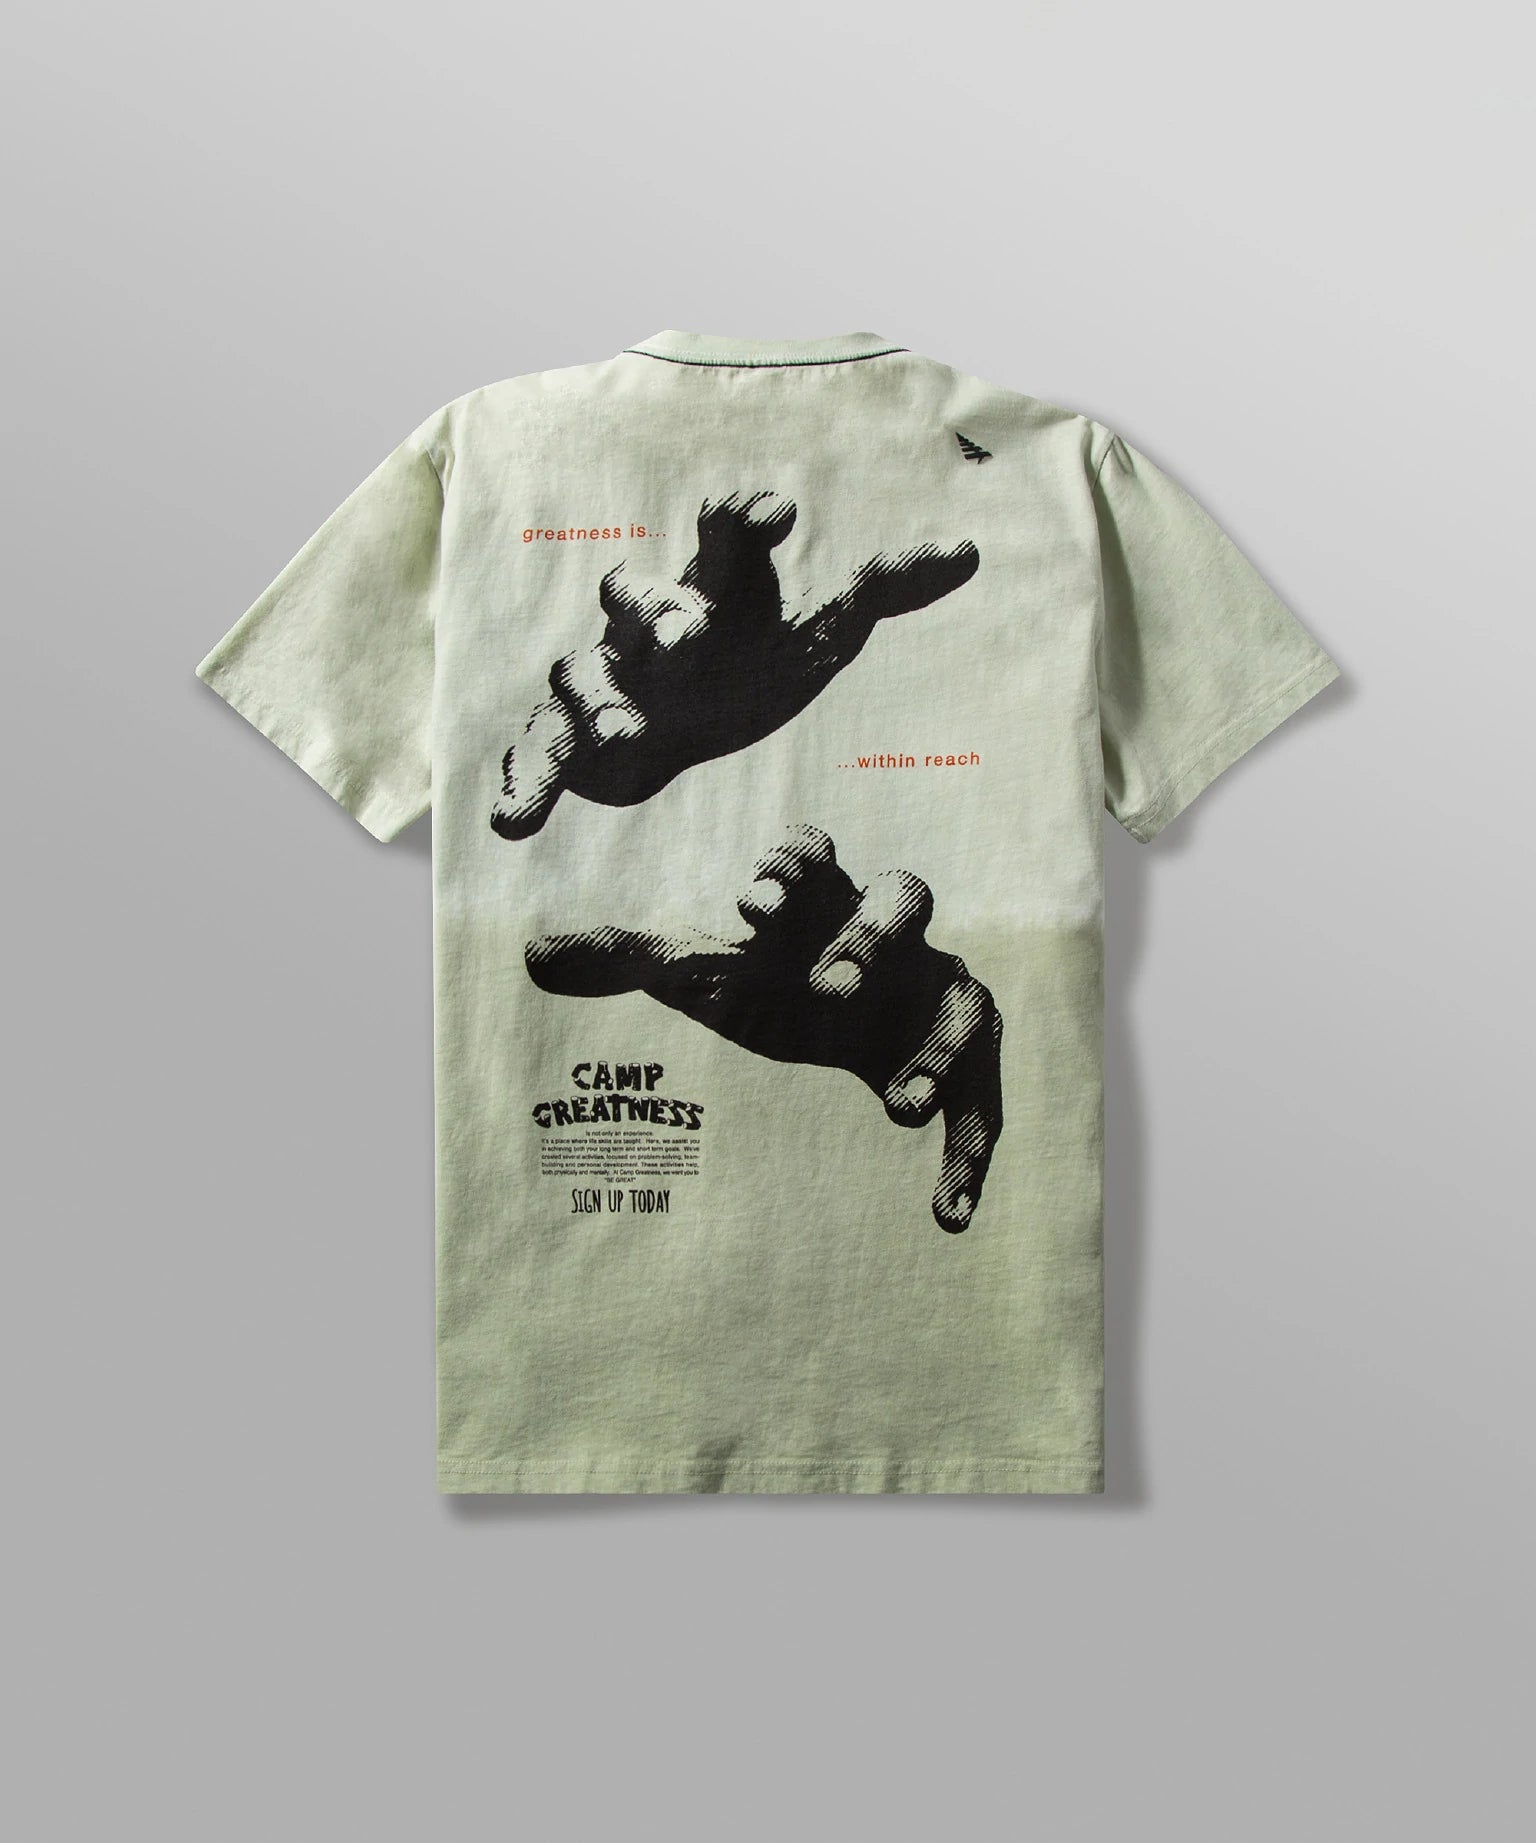 Paper Planes Tee Shirt - Greatness Within Reach